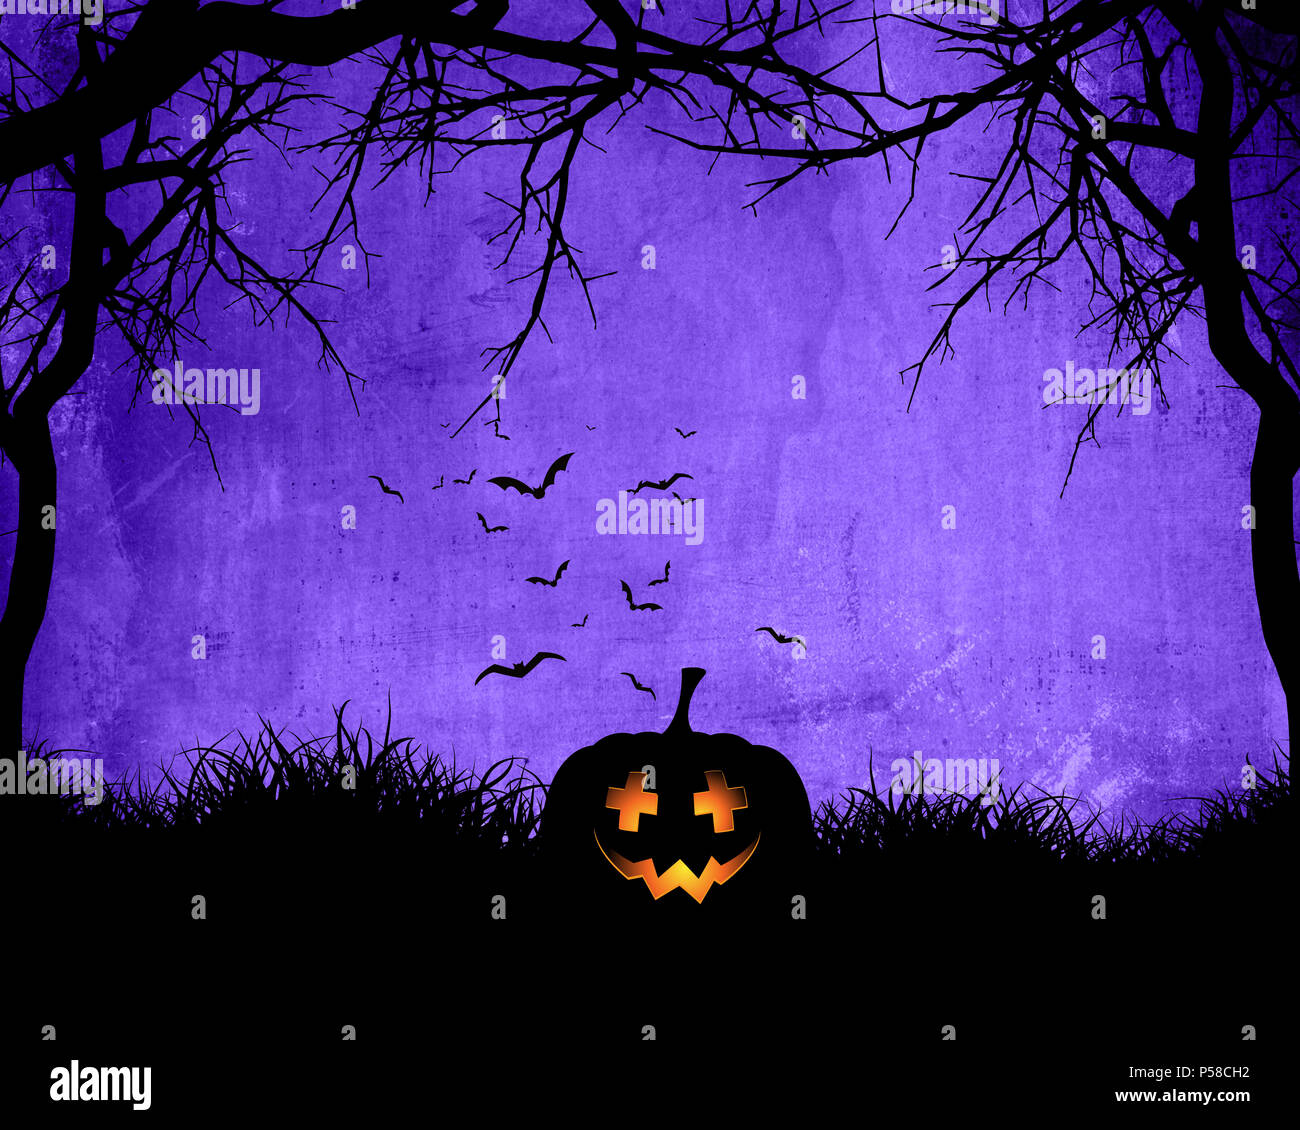 Halloween background with pumpkin on purple background with bats Stock Photo